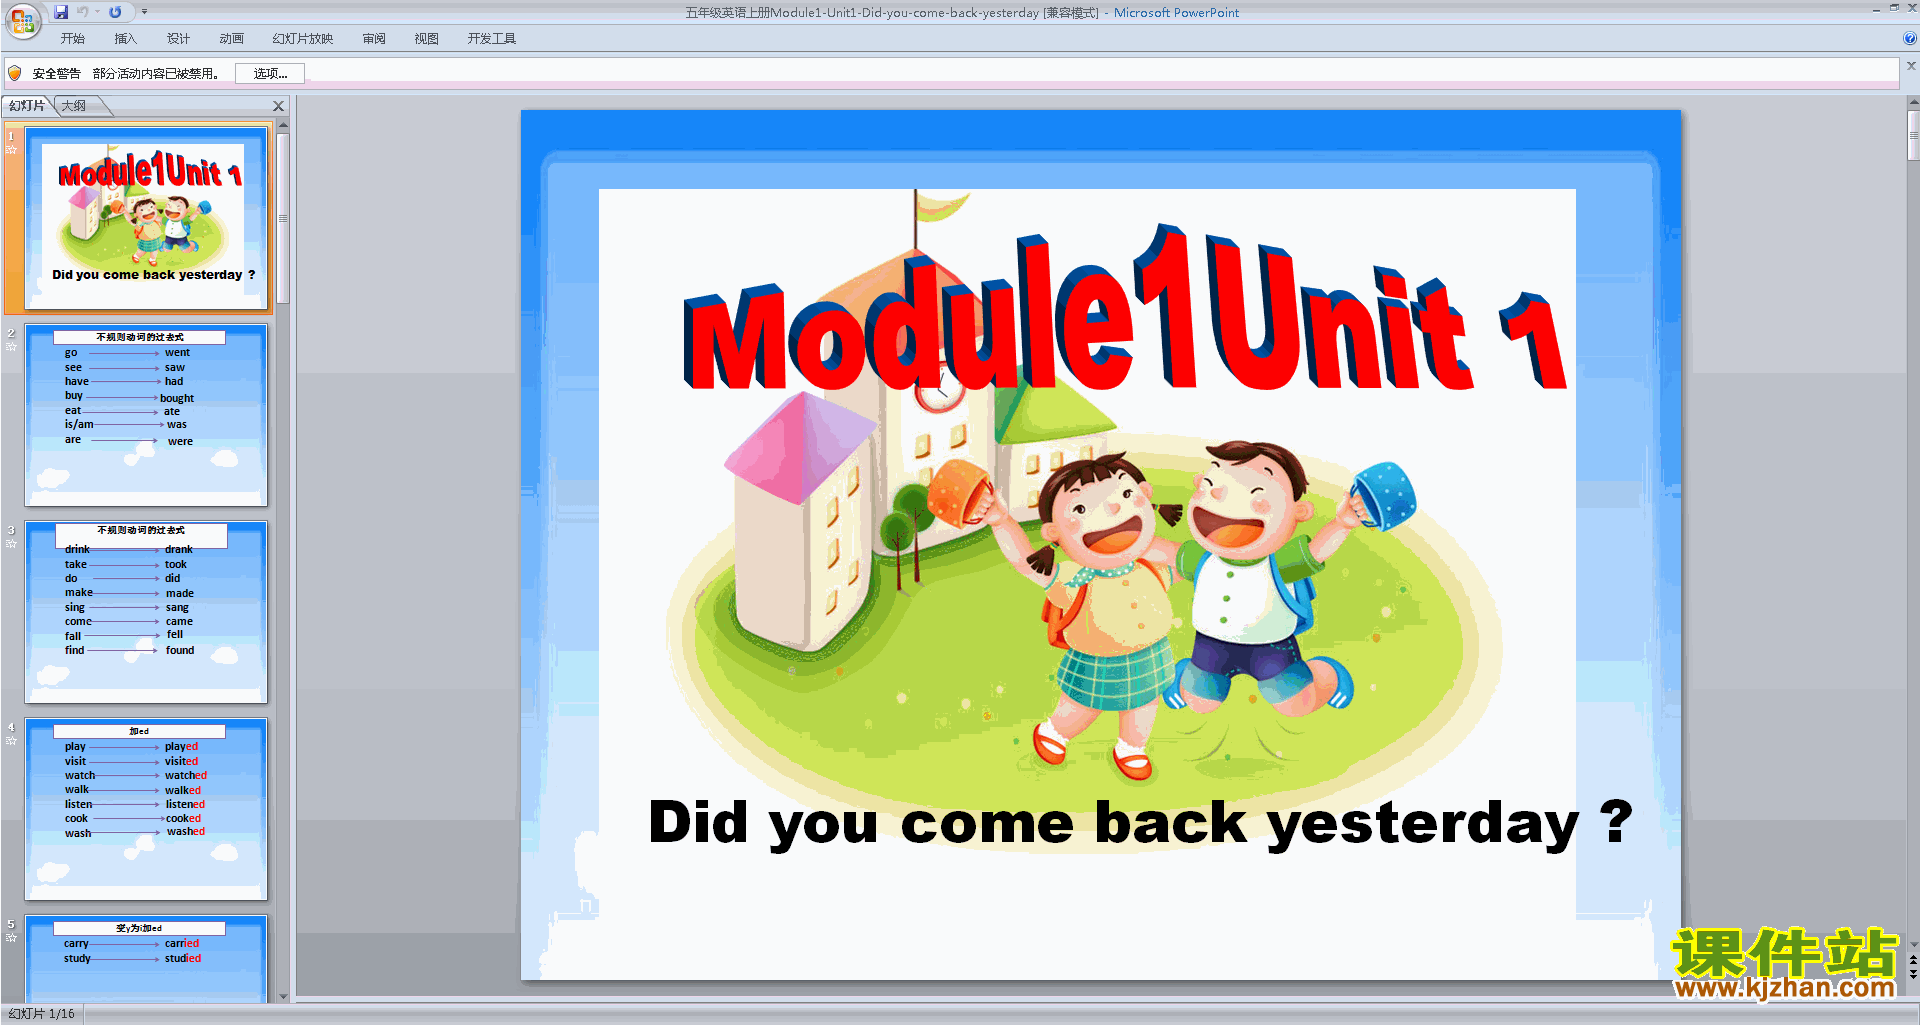 Module1 Unit1 Did you come back yesterdayppt课件19